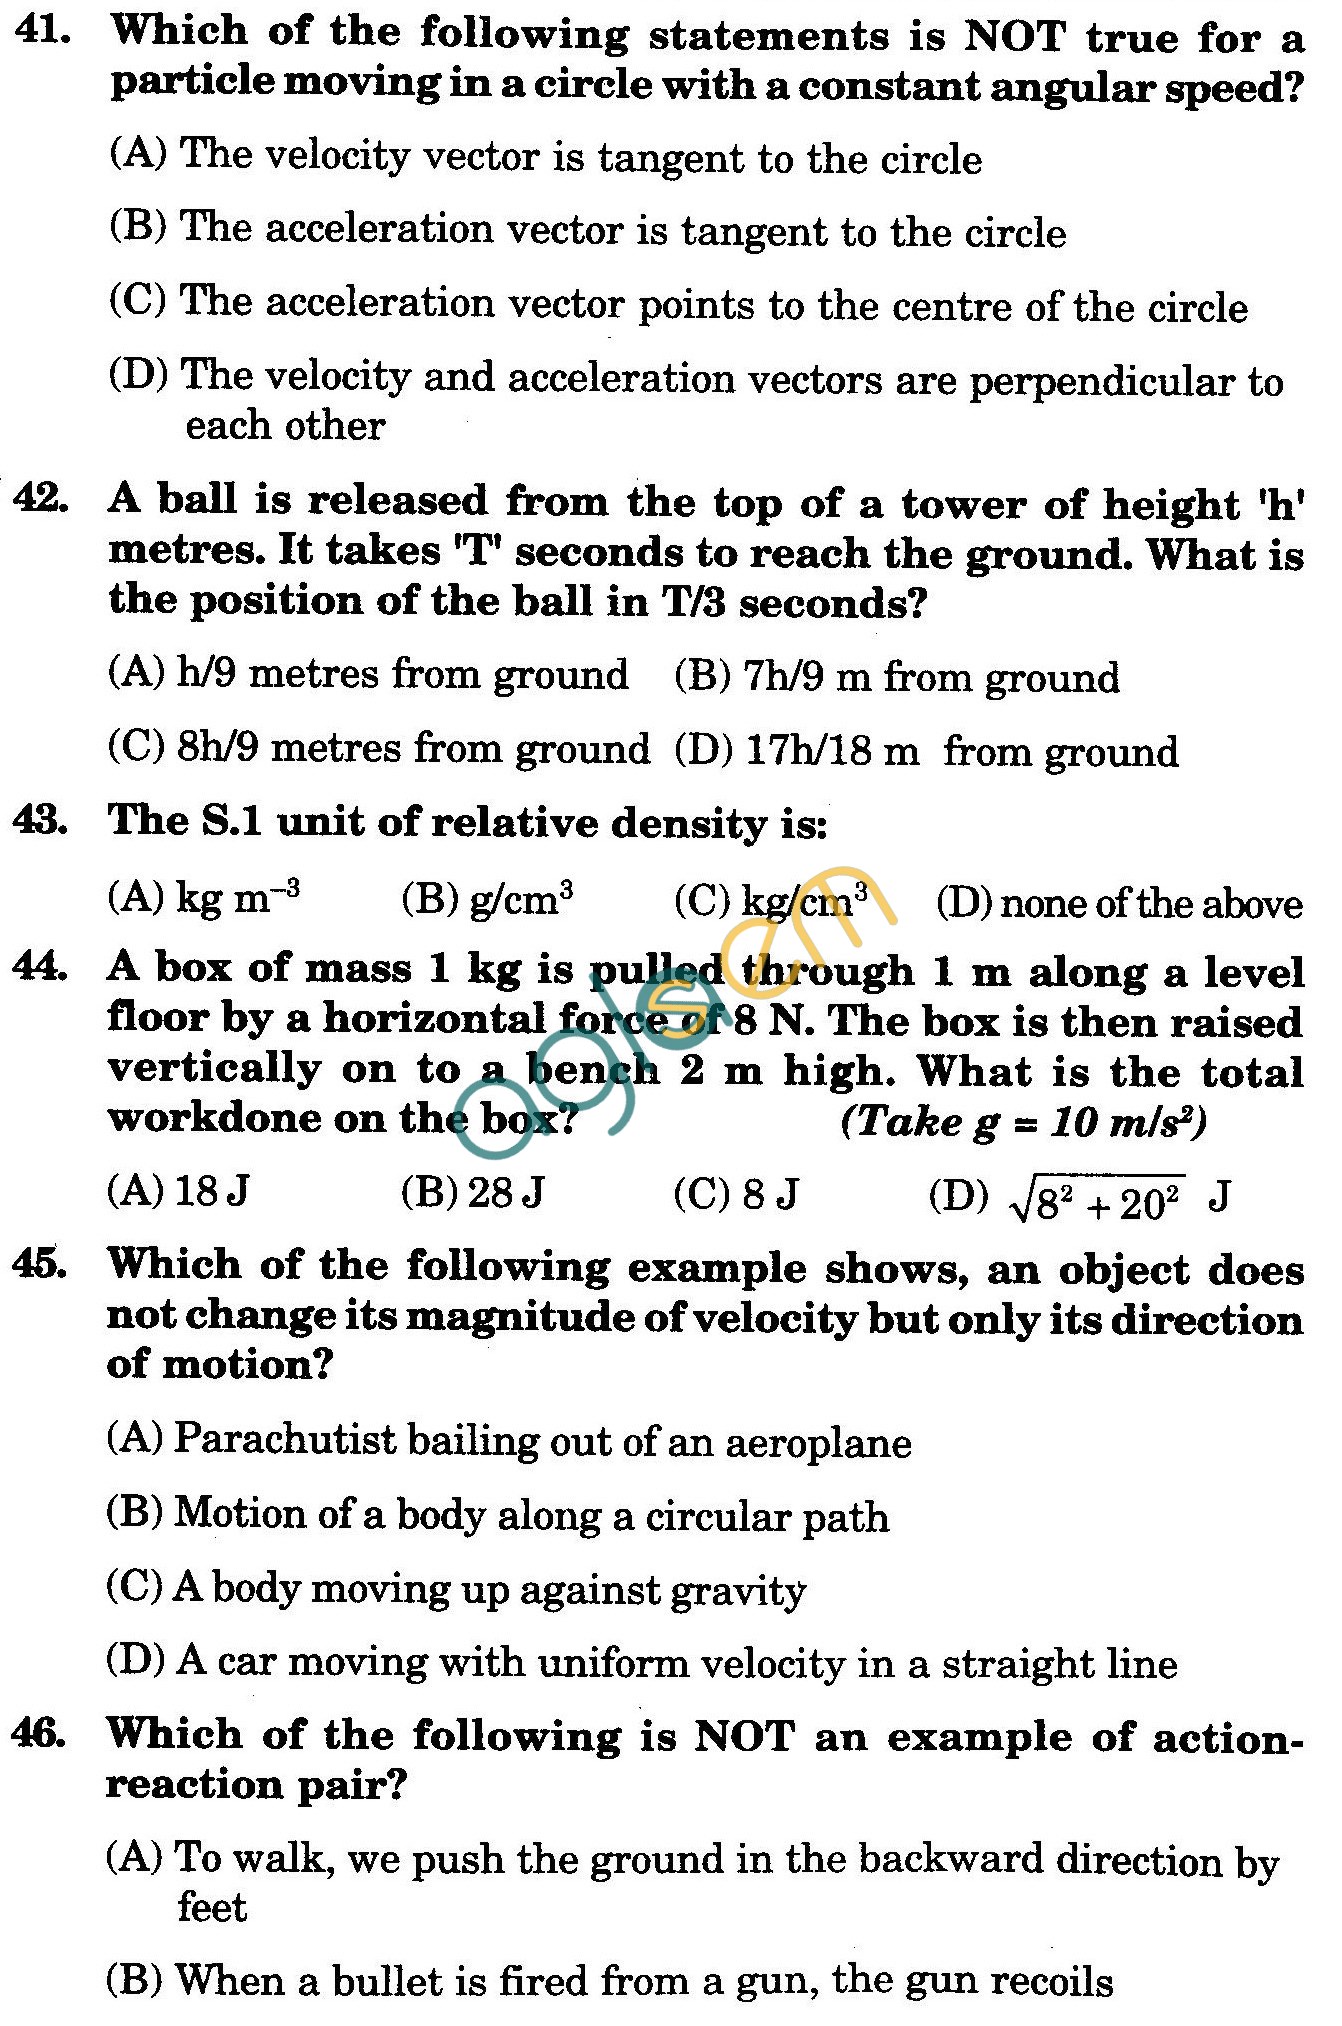 NSTSE 2009 Class IX Question Paper with Answers - Physics